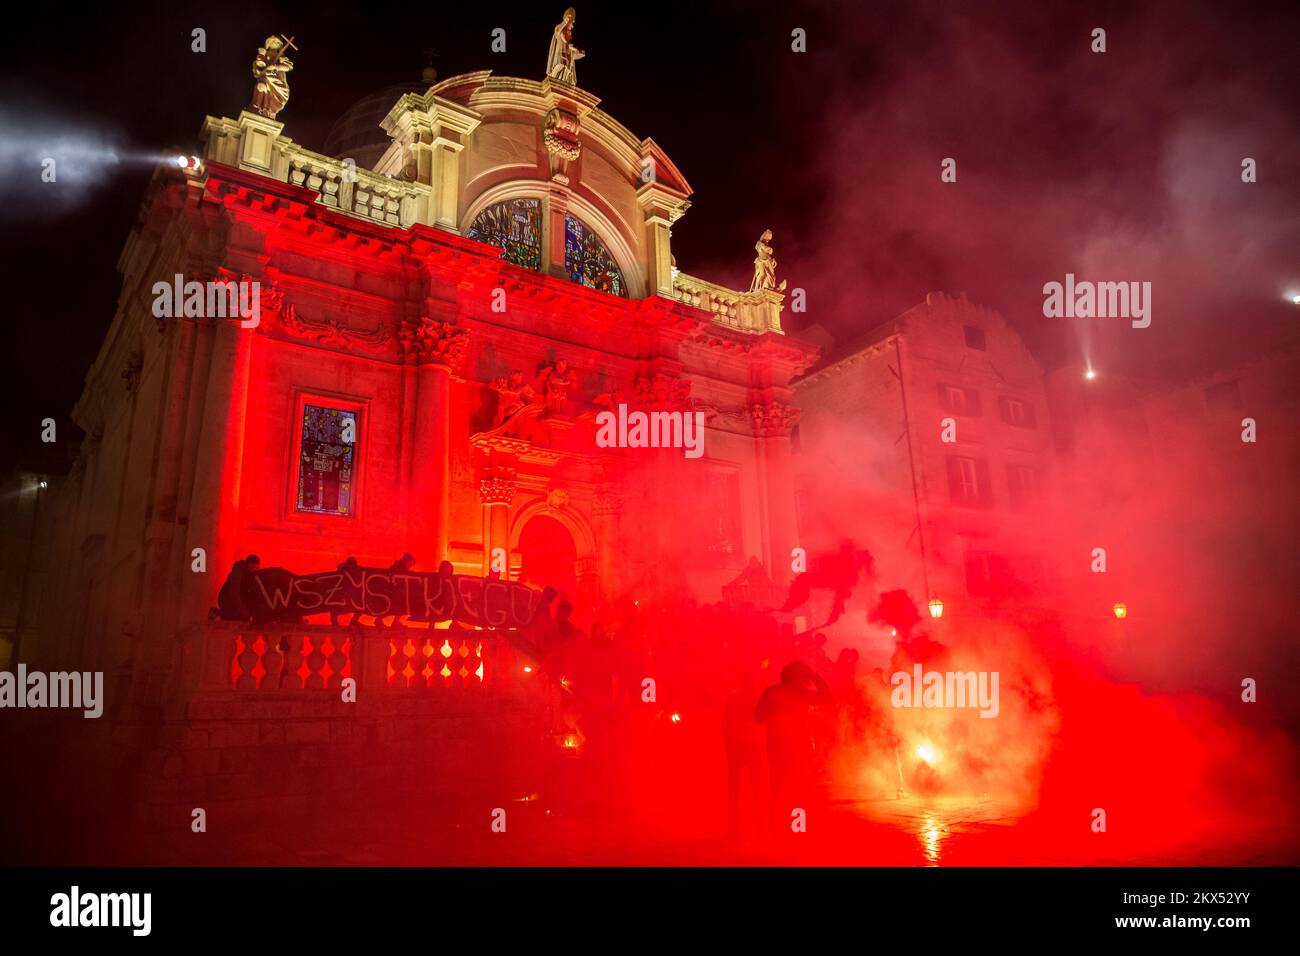 27.02.2018., Dubrovnik, Croatia - Supporters of HNK Hajduk, Torcida, burn flares in front of The Church of St. Blaise. Photo: Grgo Jelavic/PIXSELL Stock Photo